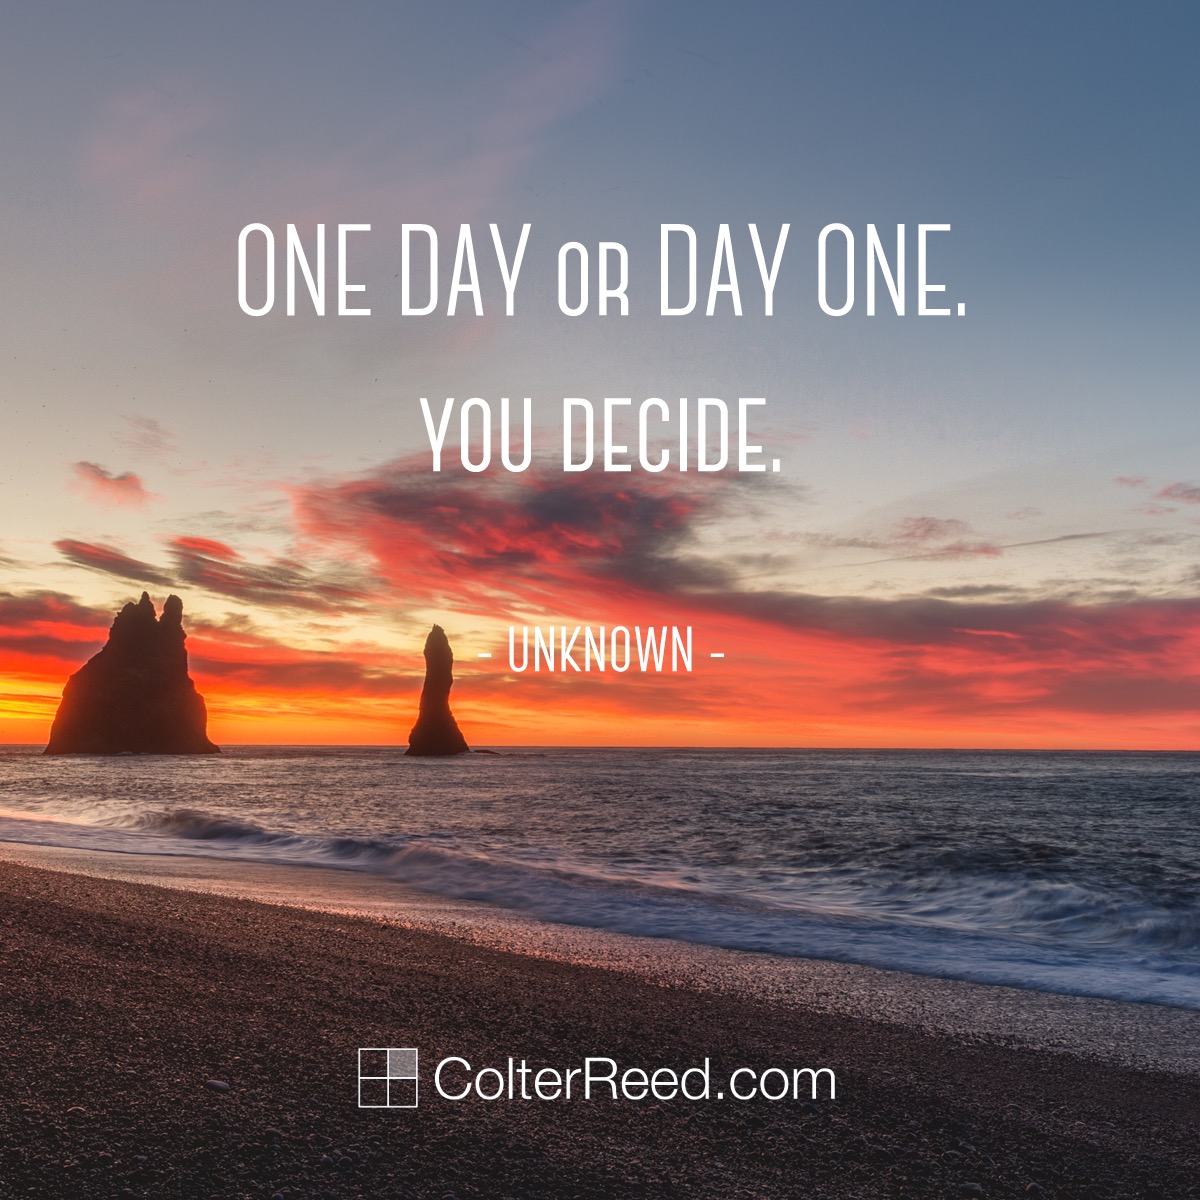 One day or day one? You decide. —Unknown